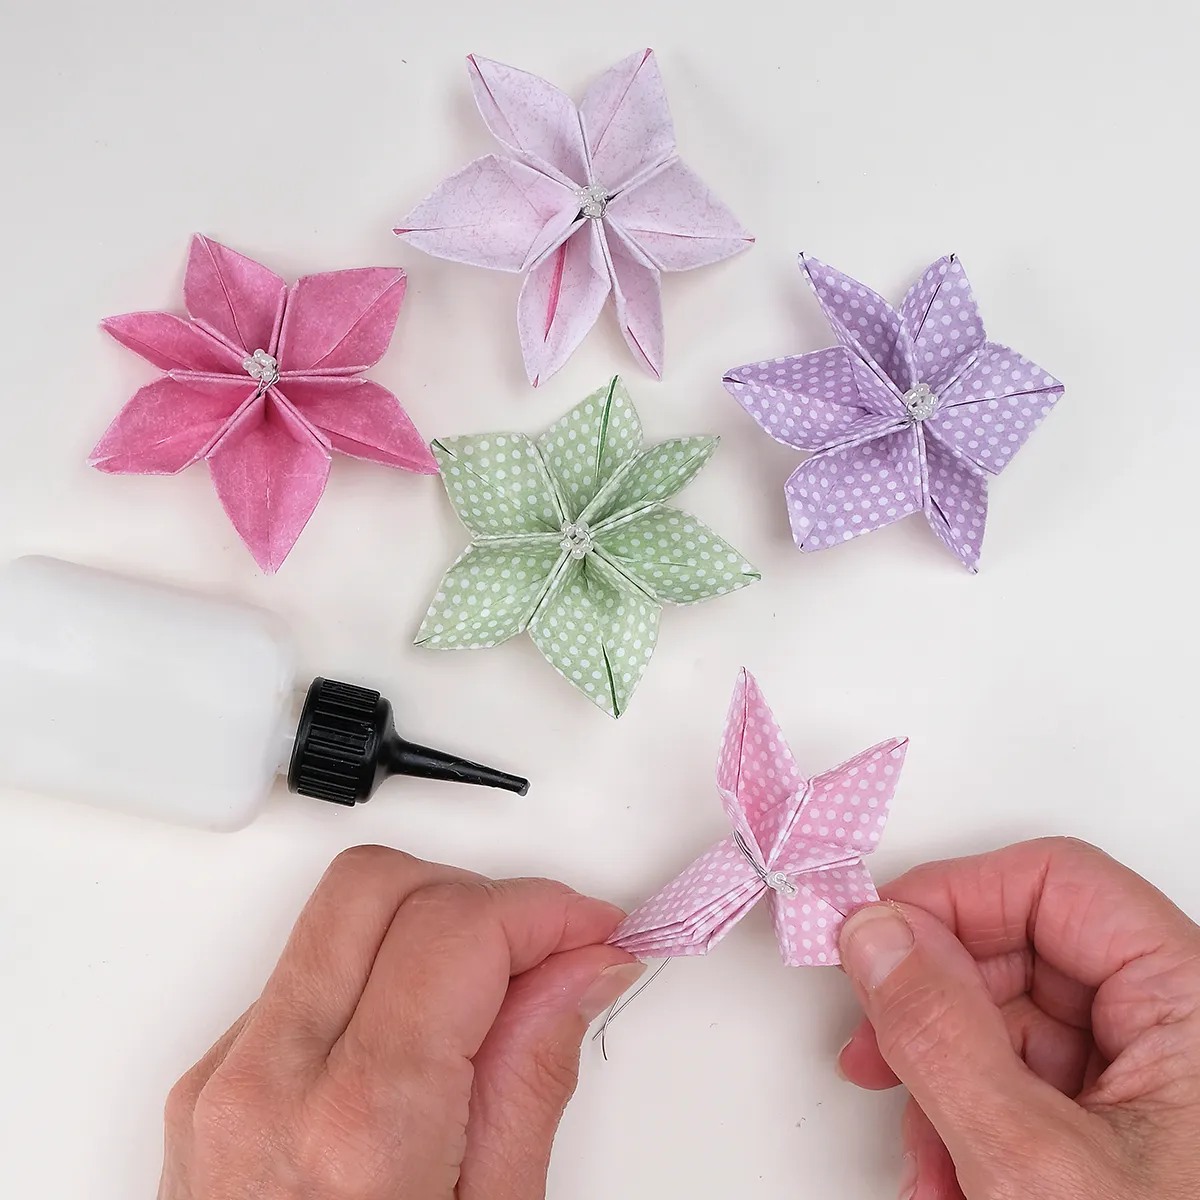 How to make an origami wreath - step 6